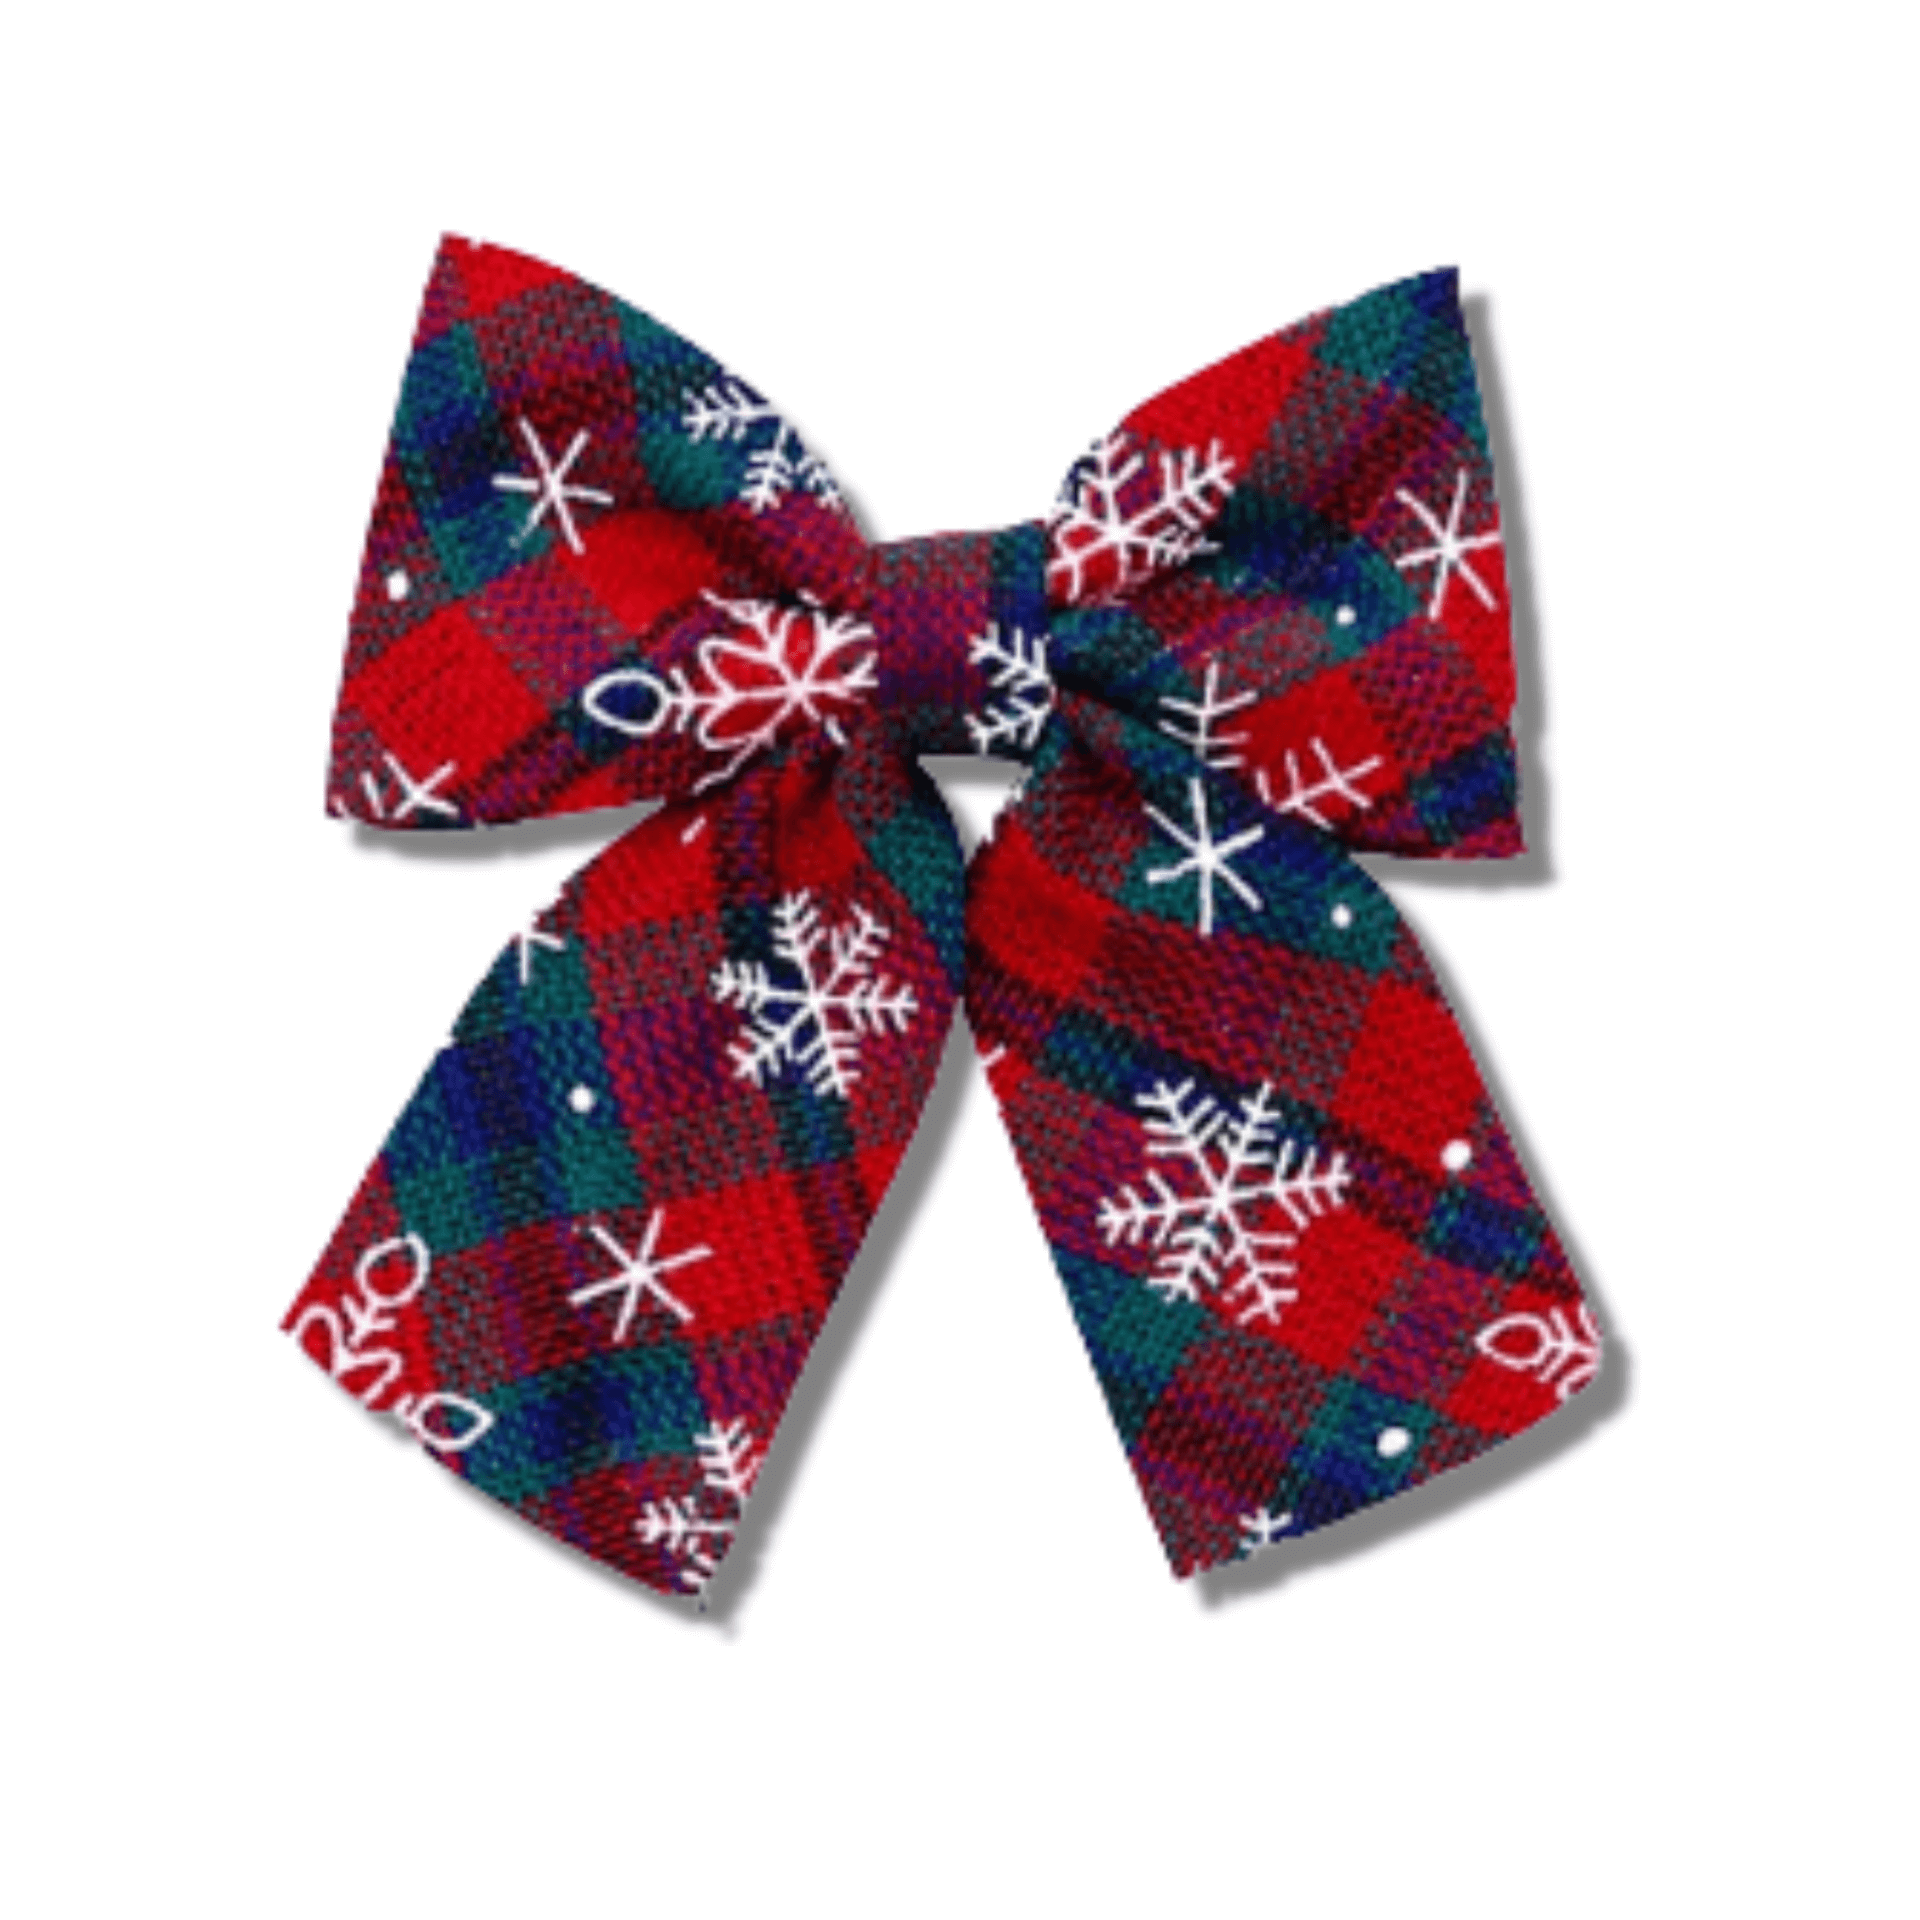 Christmas themed dog bow let's pawty 